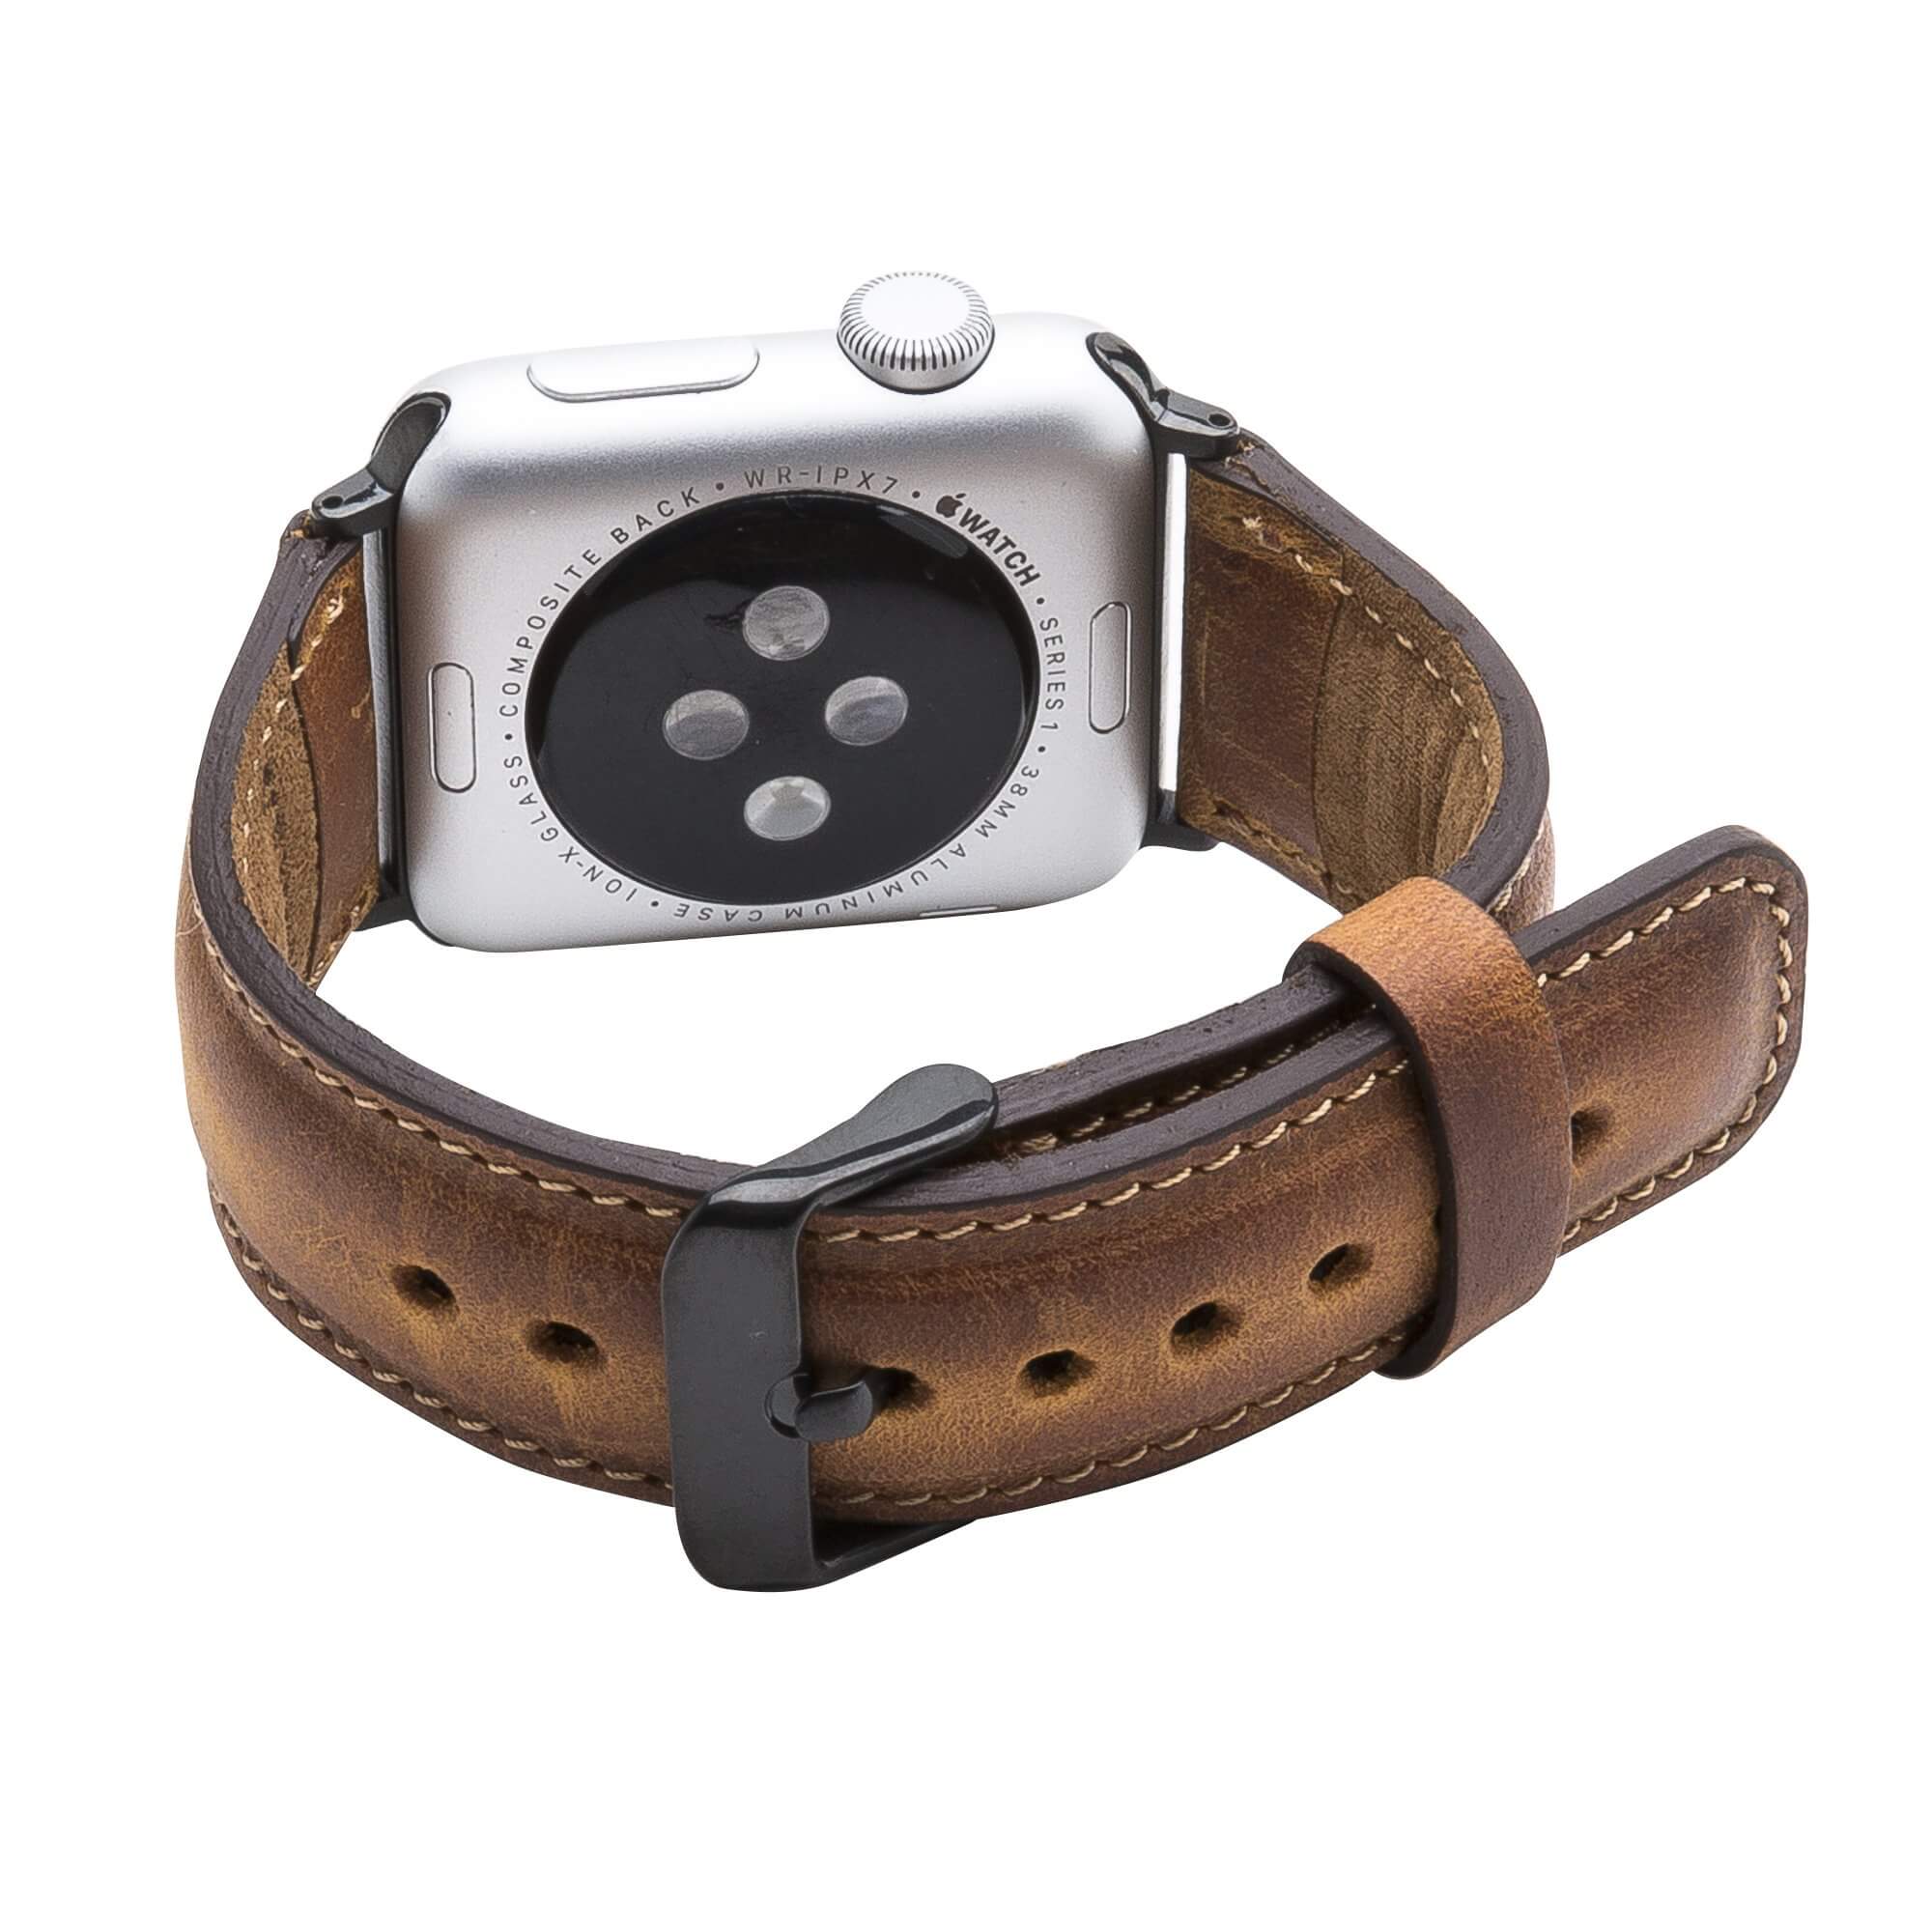  DONEGANI Milano Leather Band Compatible with Apple